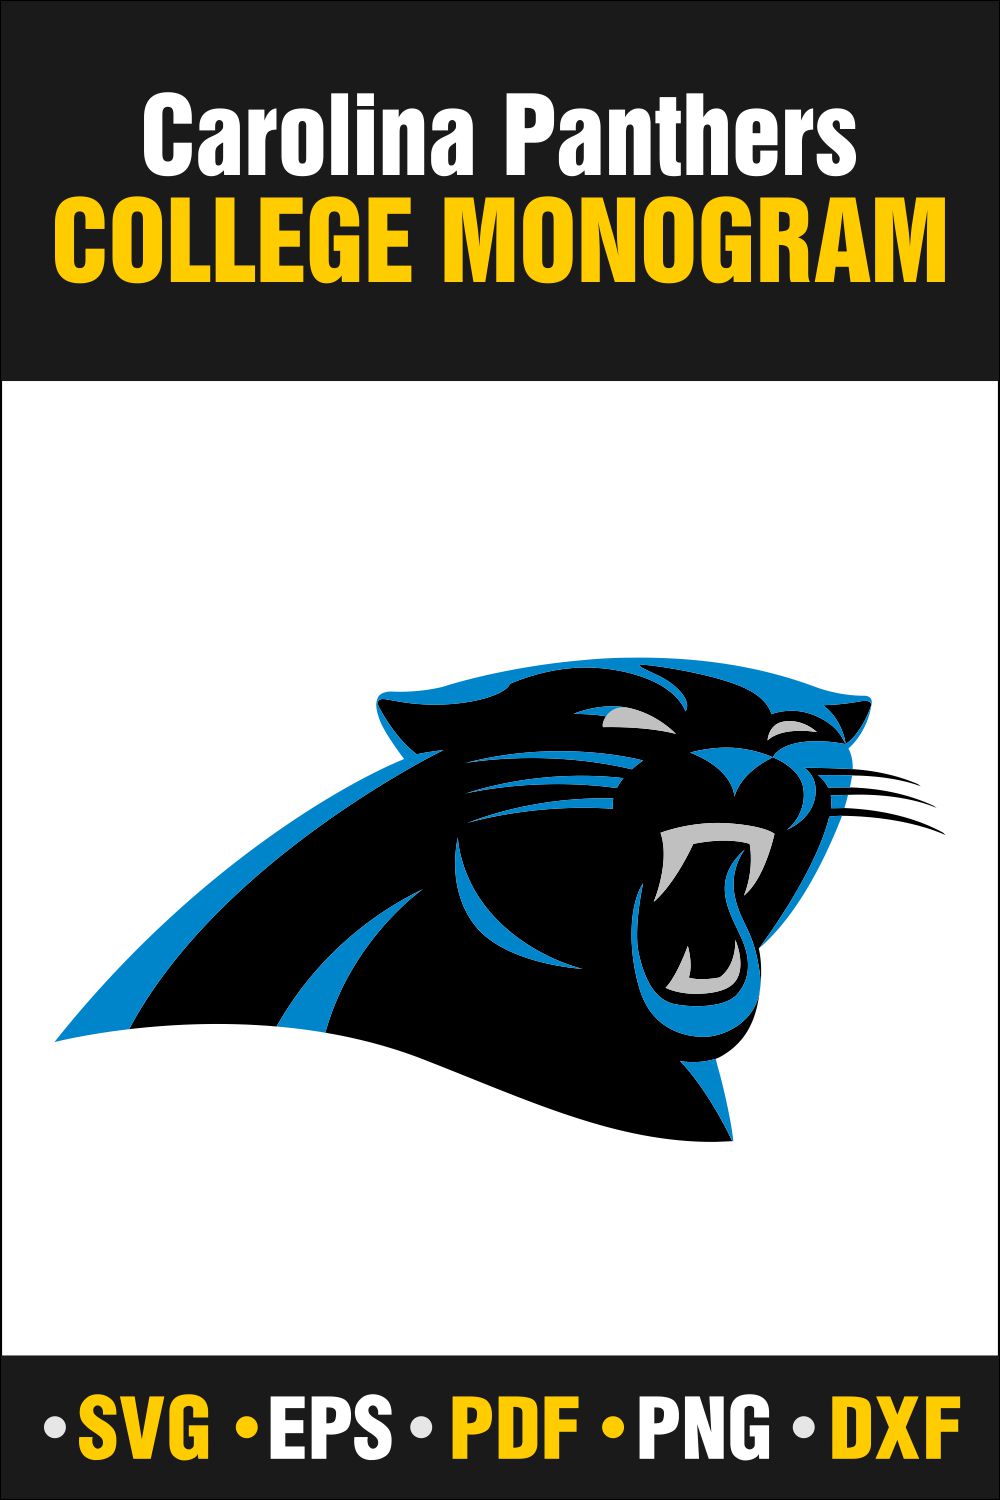 Carolina Panthers SVG, PDF, PNG, DXF, EPS - Only $2 pinterest preview image.